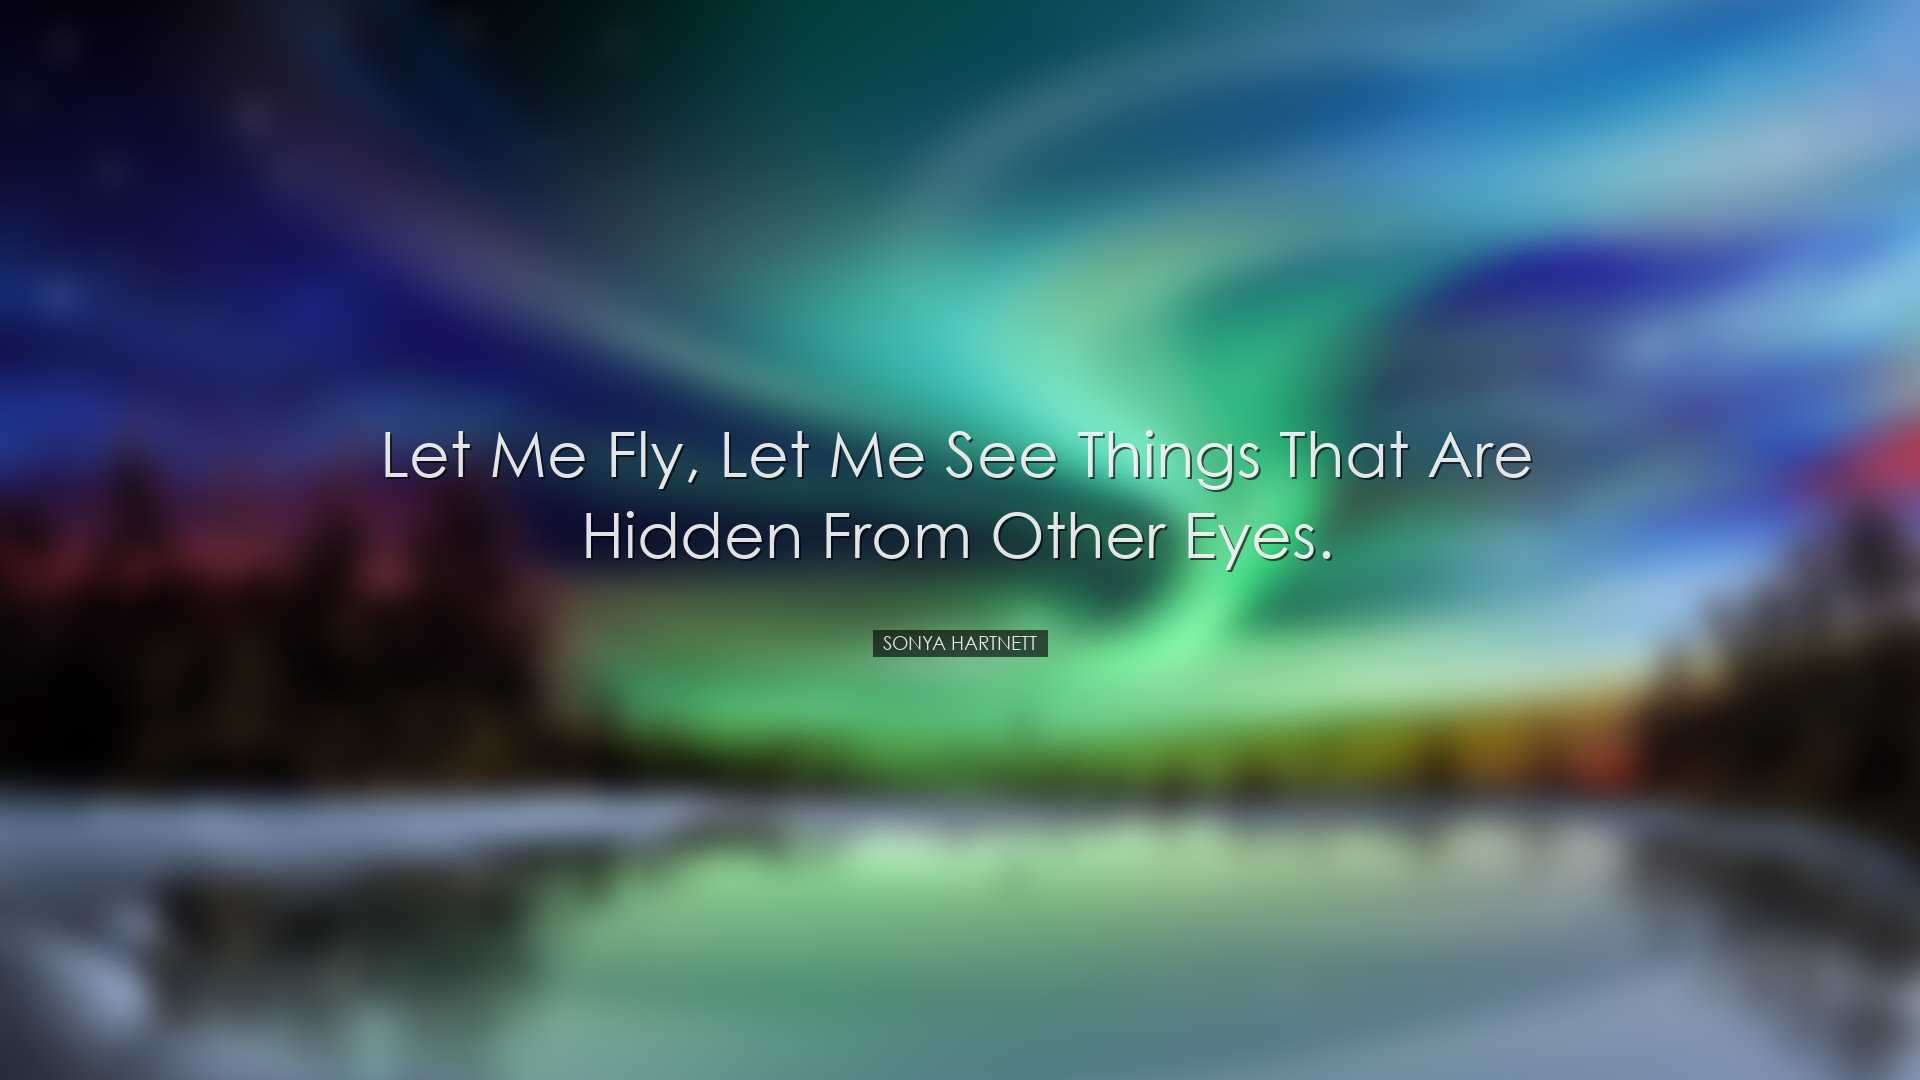 Let me fly, let me see things that are hidden from other eyes. - S